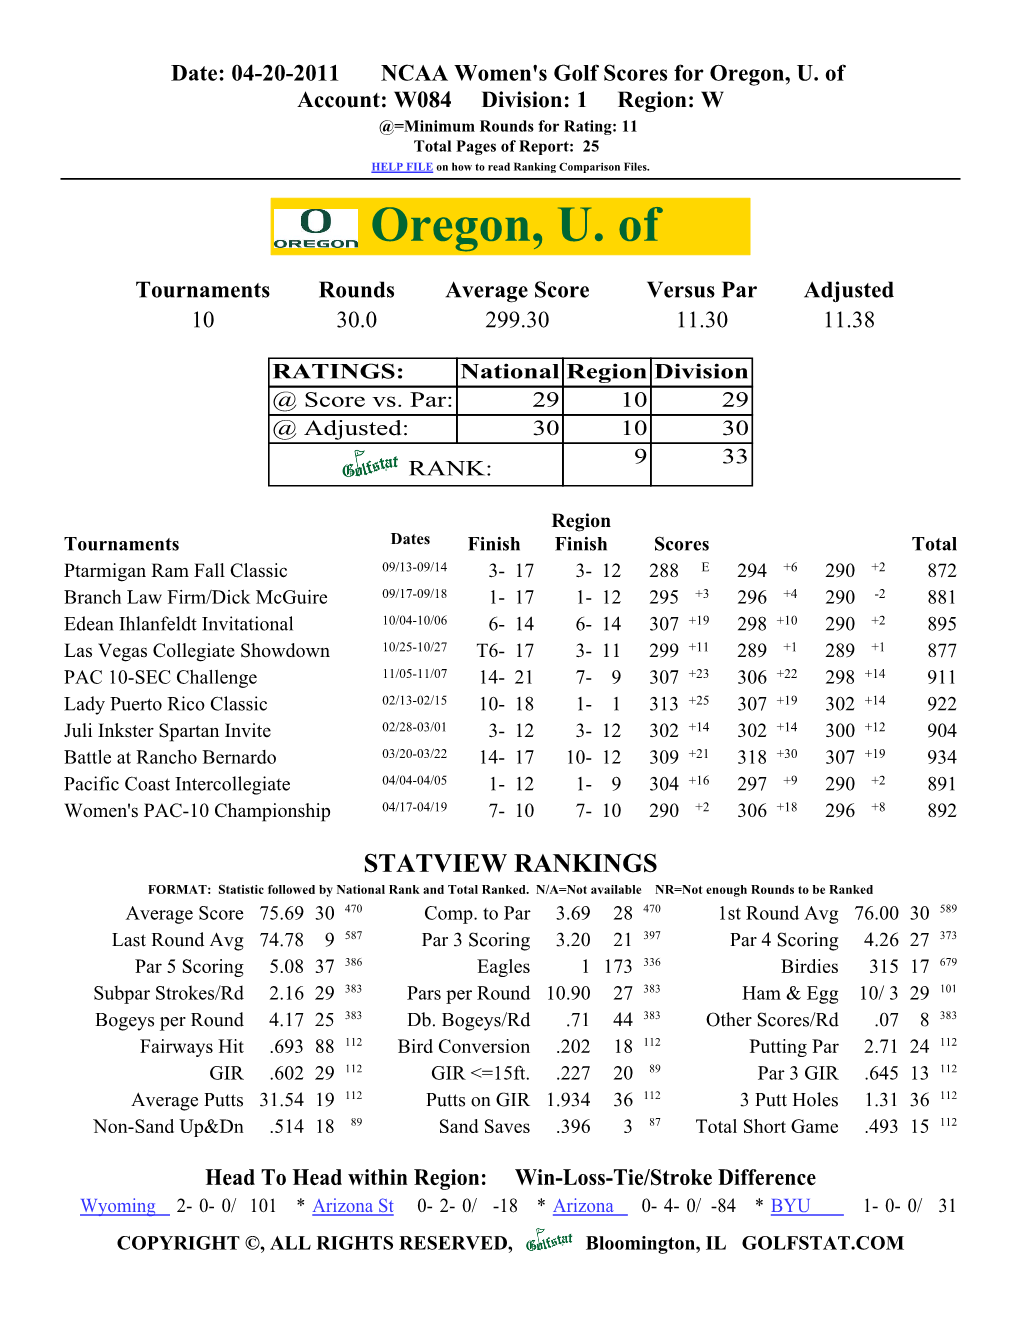 Oregon, U. of Account: W084 Division: 1 Region: W @=Minimum Rounds for Rating: 11 Total Pages of Report: 25 HELP FILE on How to Read Ranking Comparison Files